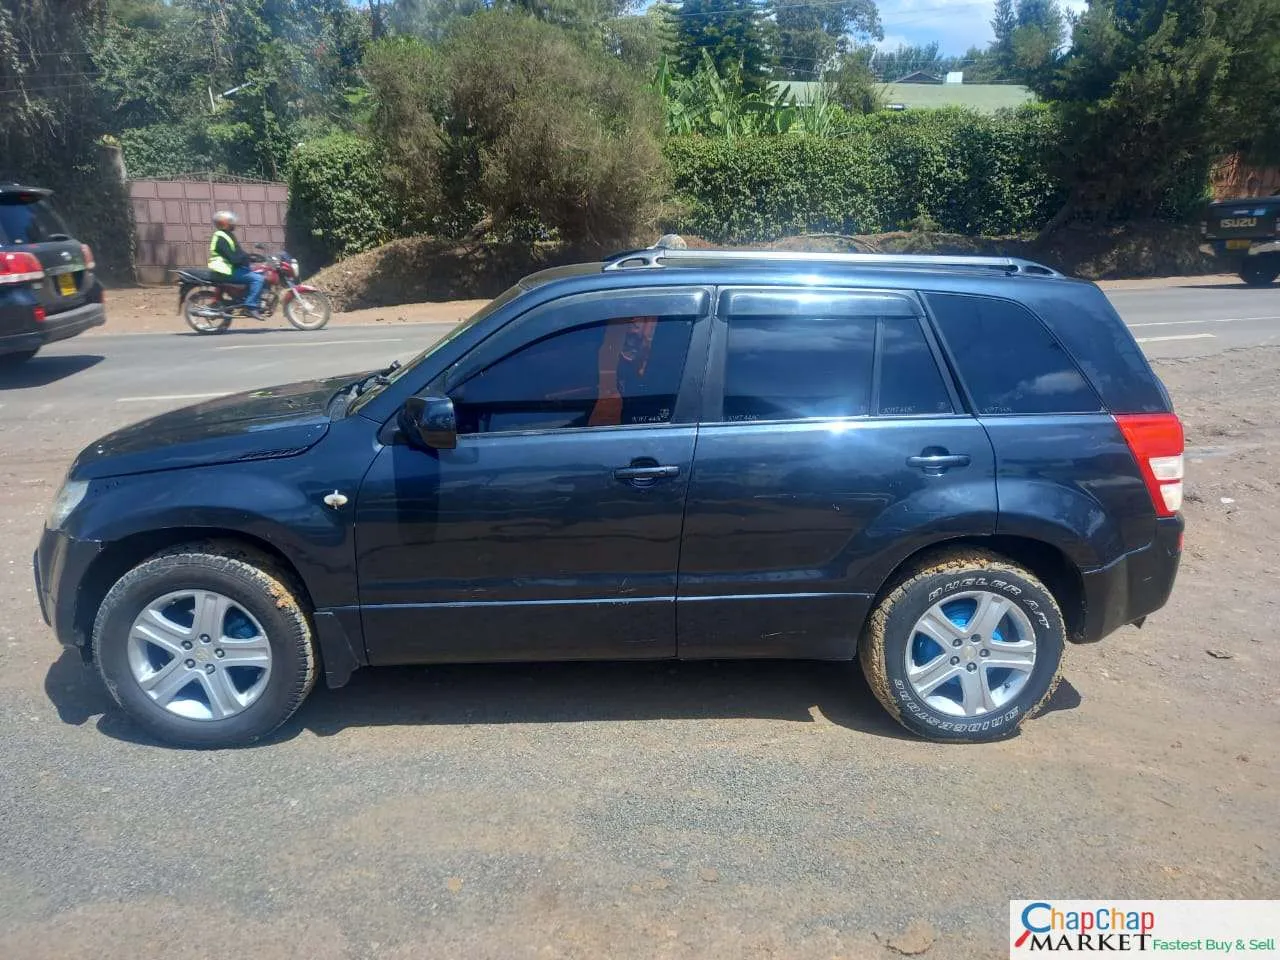 Cars Cars For Sale-Suzuki ESCUDO QUICK SALE You Pay 30% Deposit Trade in OK escudo for sale in kenya hire purchase installments EXCLUSIVE 6